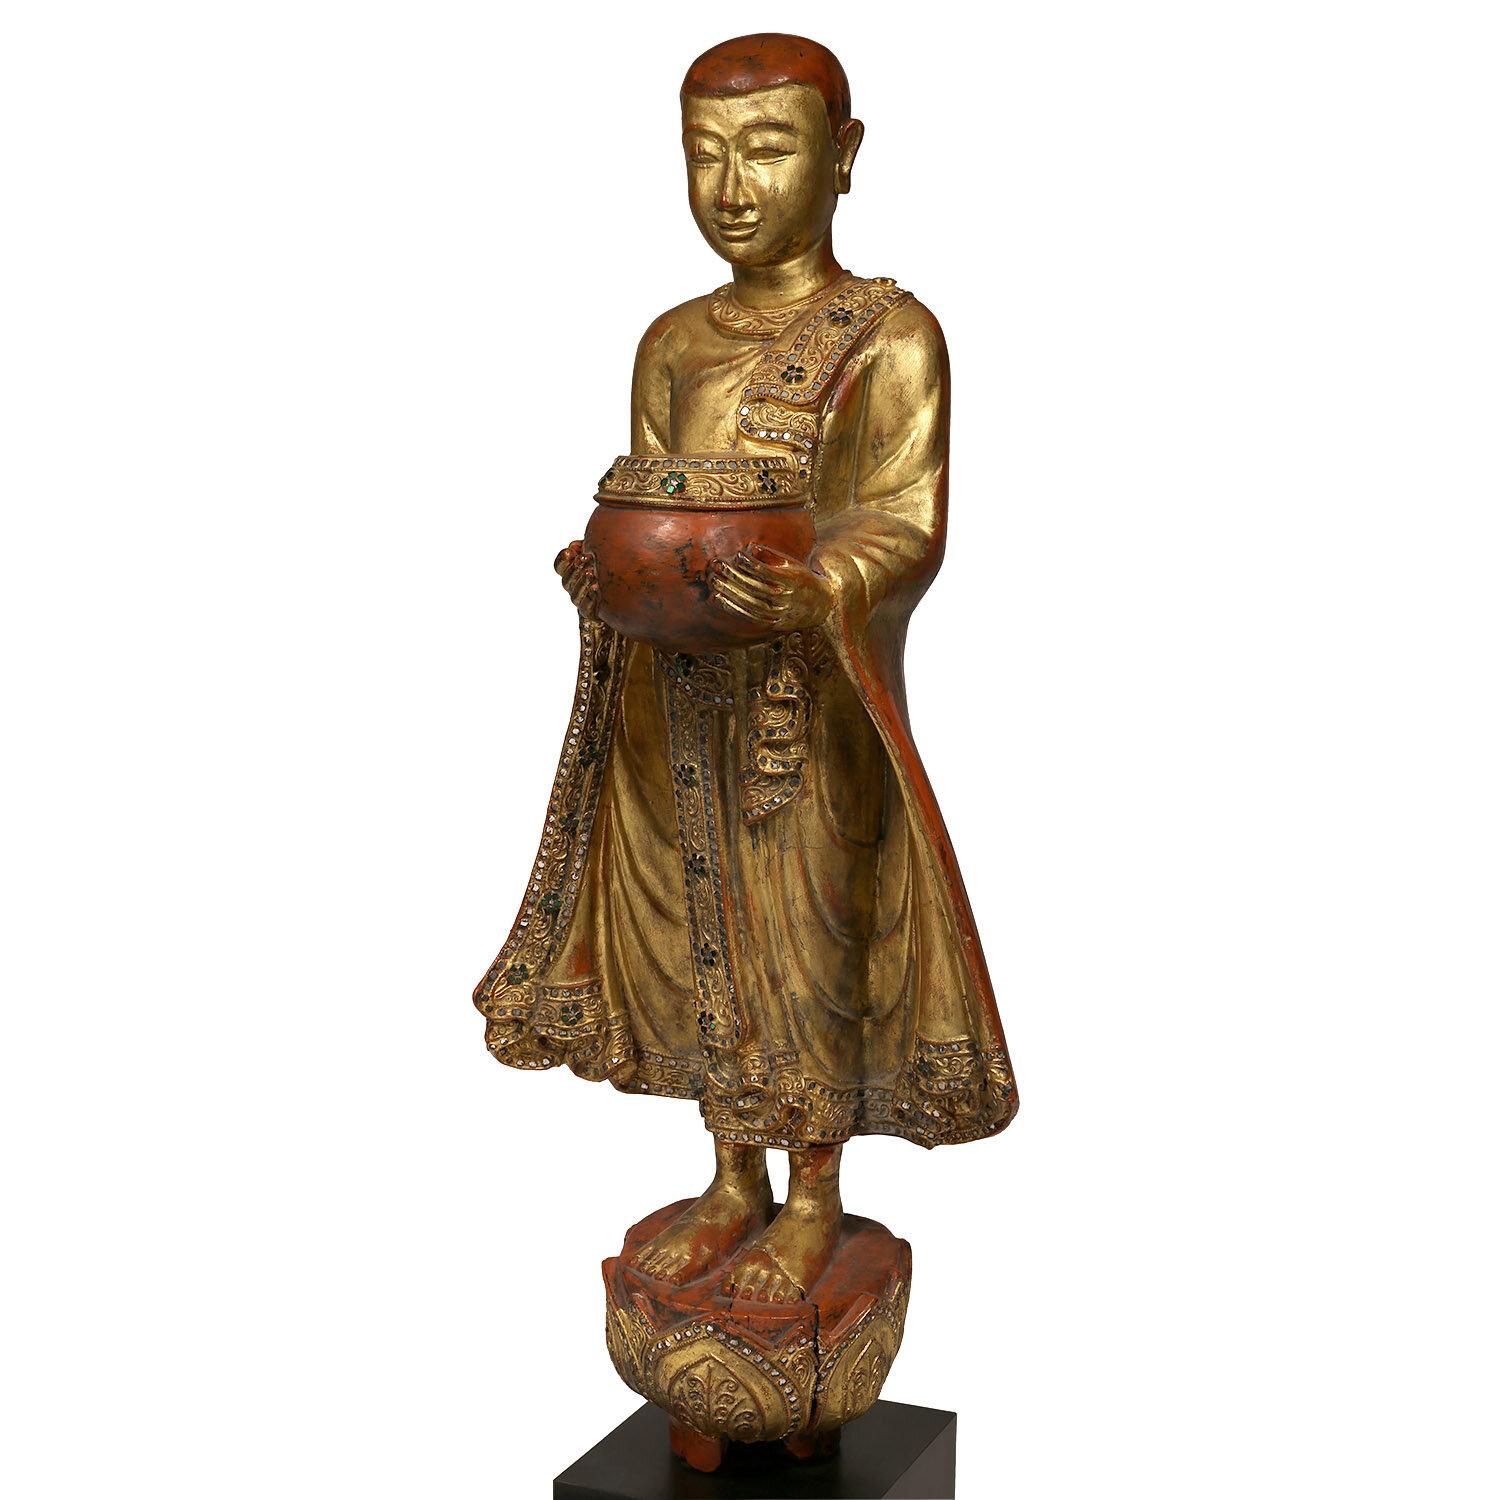 Vintage Burmese Mandalay style bejeweled Buddhist statue

This is the classic Burmese representation of a Buddhist monk.  Depicted in his youth with a sweet face, a friendly, accepting countenance, flowing robes and holding a bowl.  Statues such as